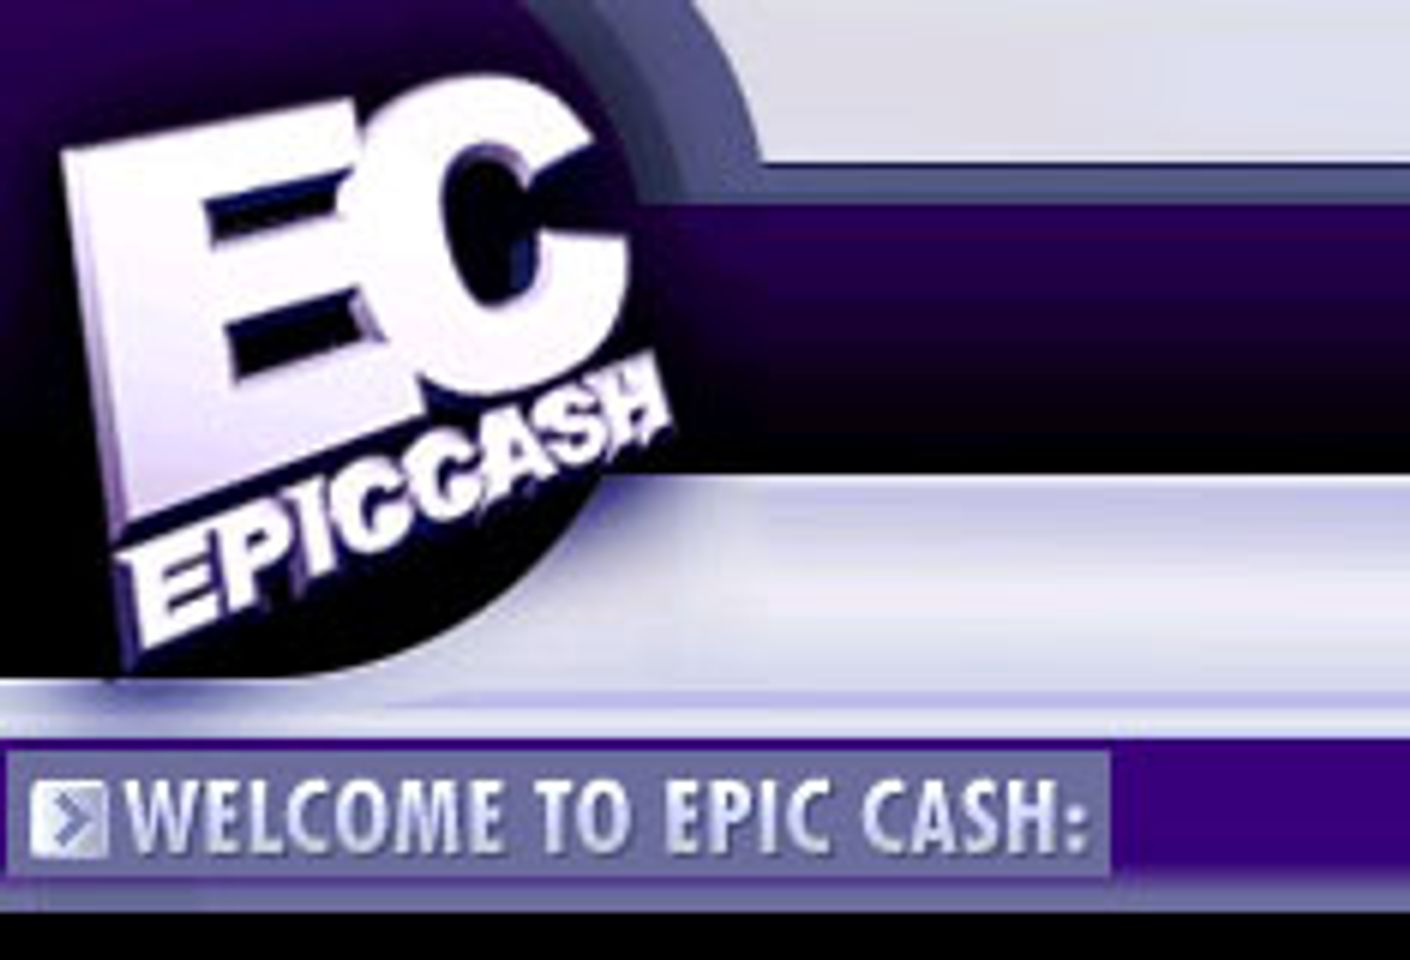 EpicCash Wins Judgment Against Suchomski, Collects $30,000